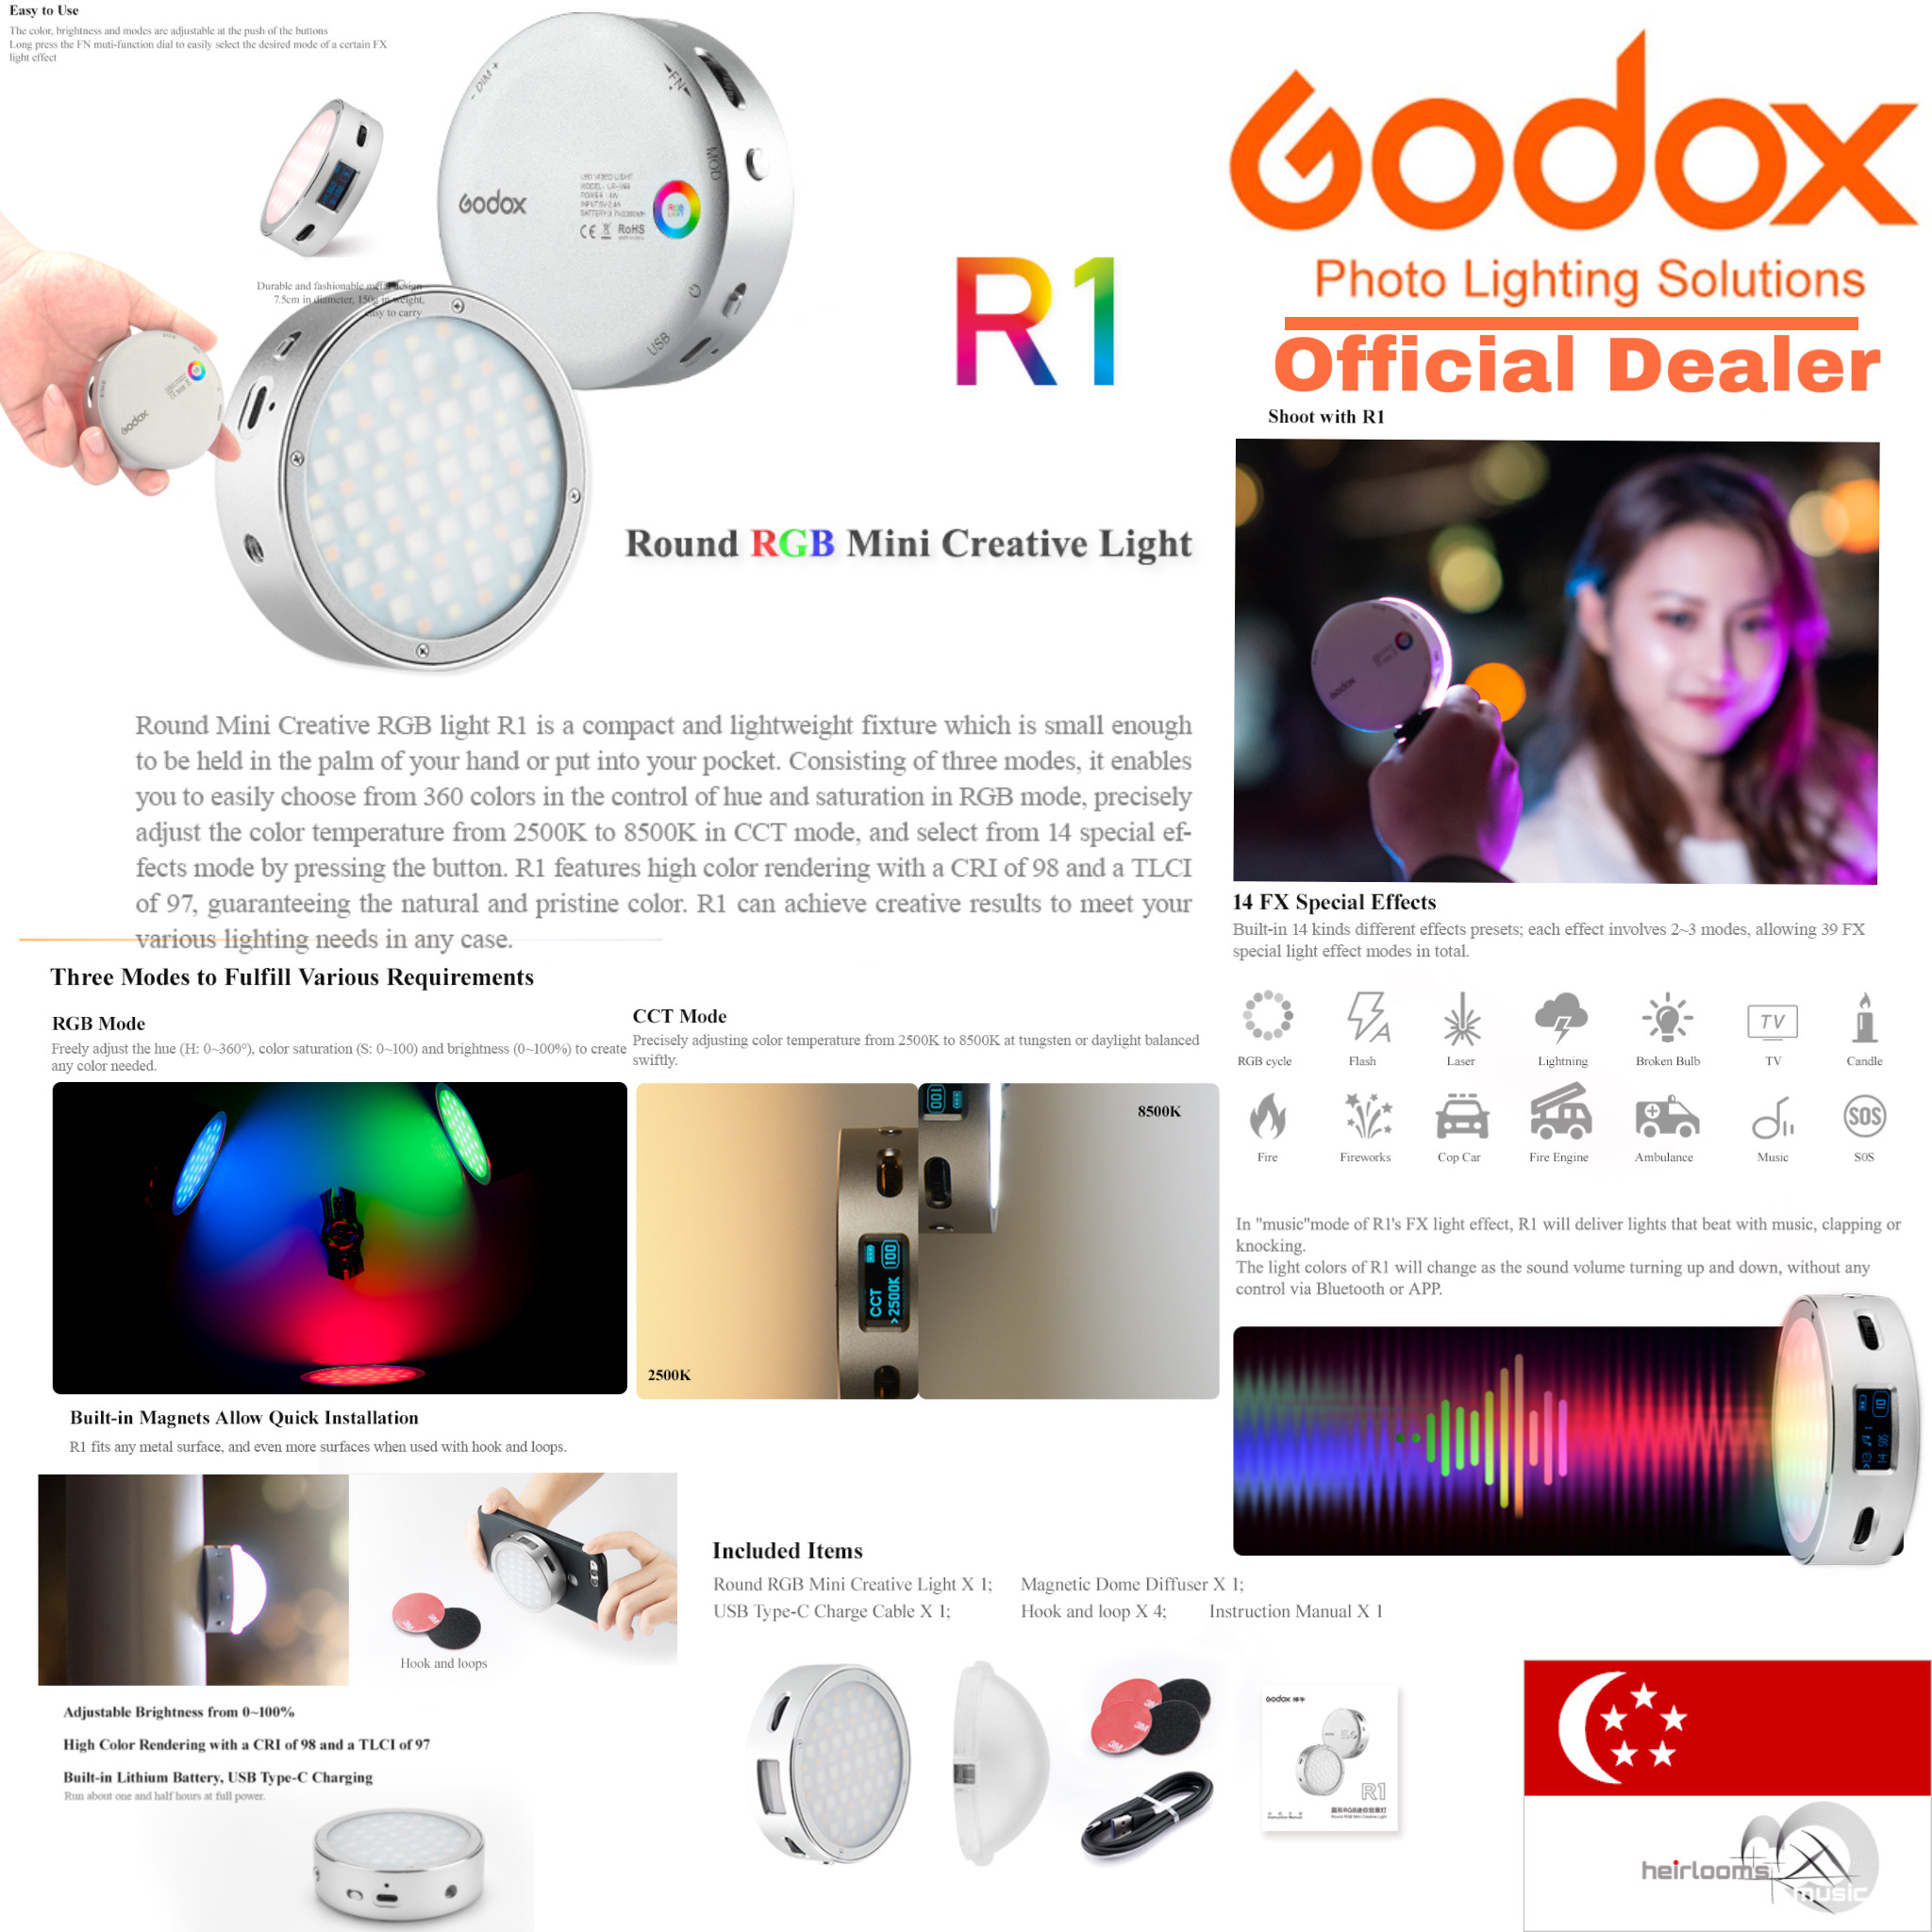 CRI 98 TLCI 97 2500K-8500K Dimmable LED Video Light with Godox AK-R1 Accessories Kit for More Dramatic Lighting Effectives Godox R1 RGB Full Color Round Mini Creative Light 